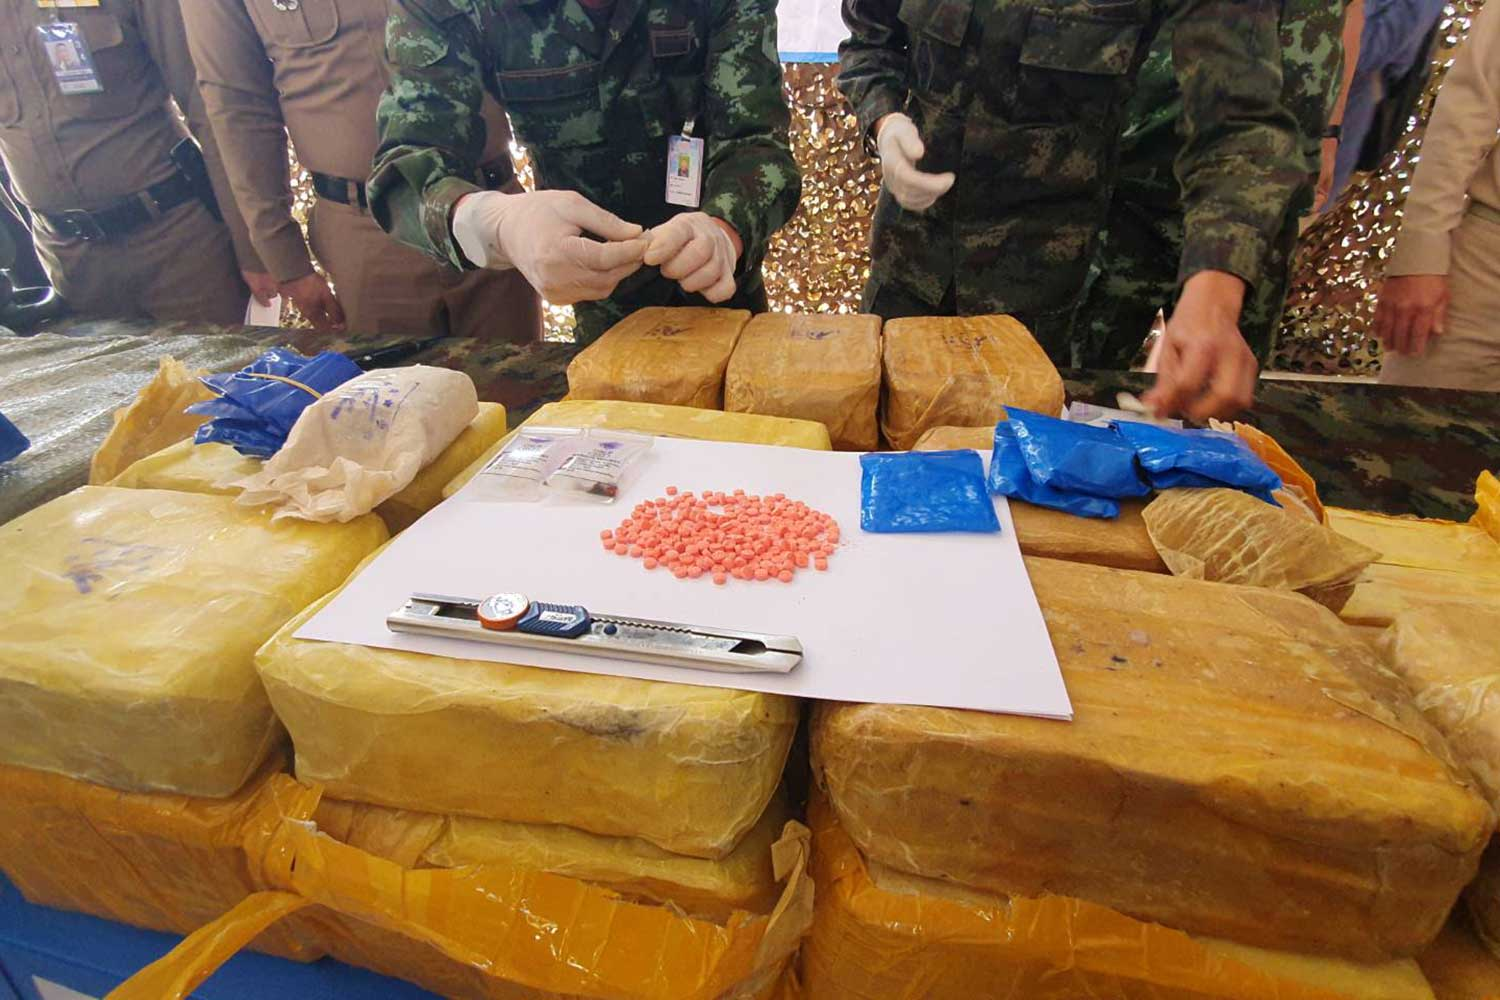 Bringing an ice drug in Thailand is also punished with a heavy prison sentence - Photo 1.